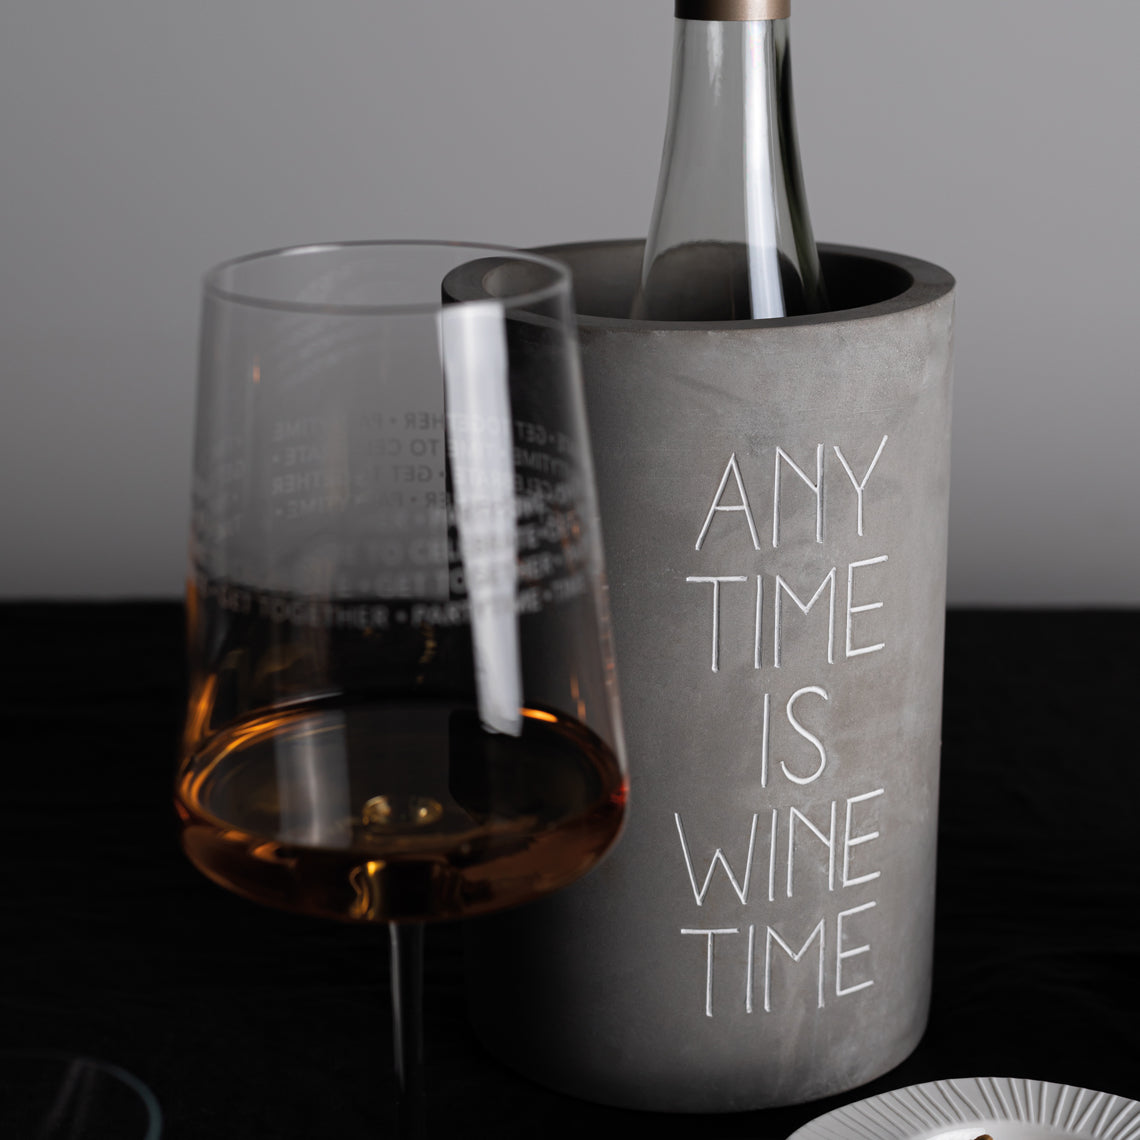 WINE COOLER "ANY TIME IS WINE TIME"